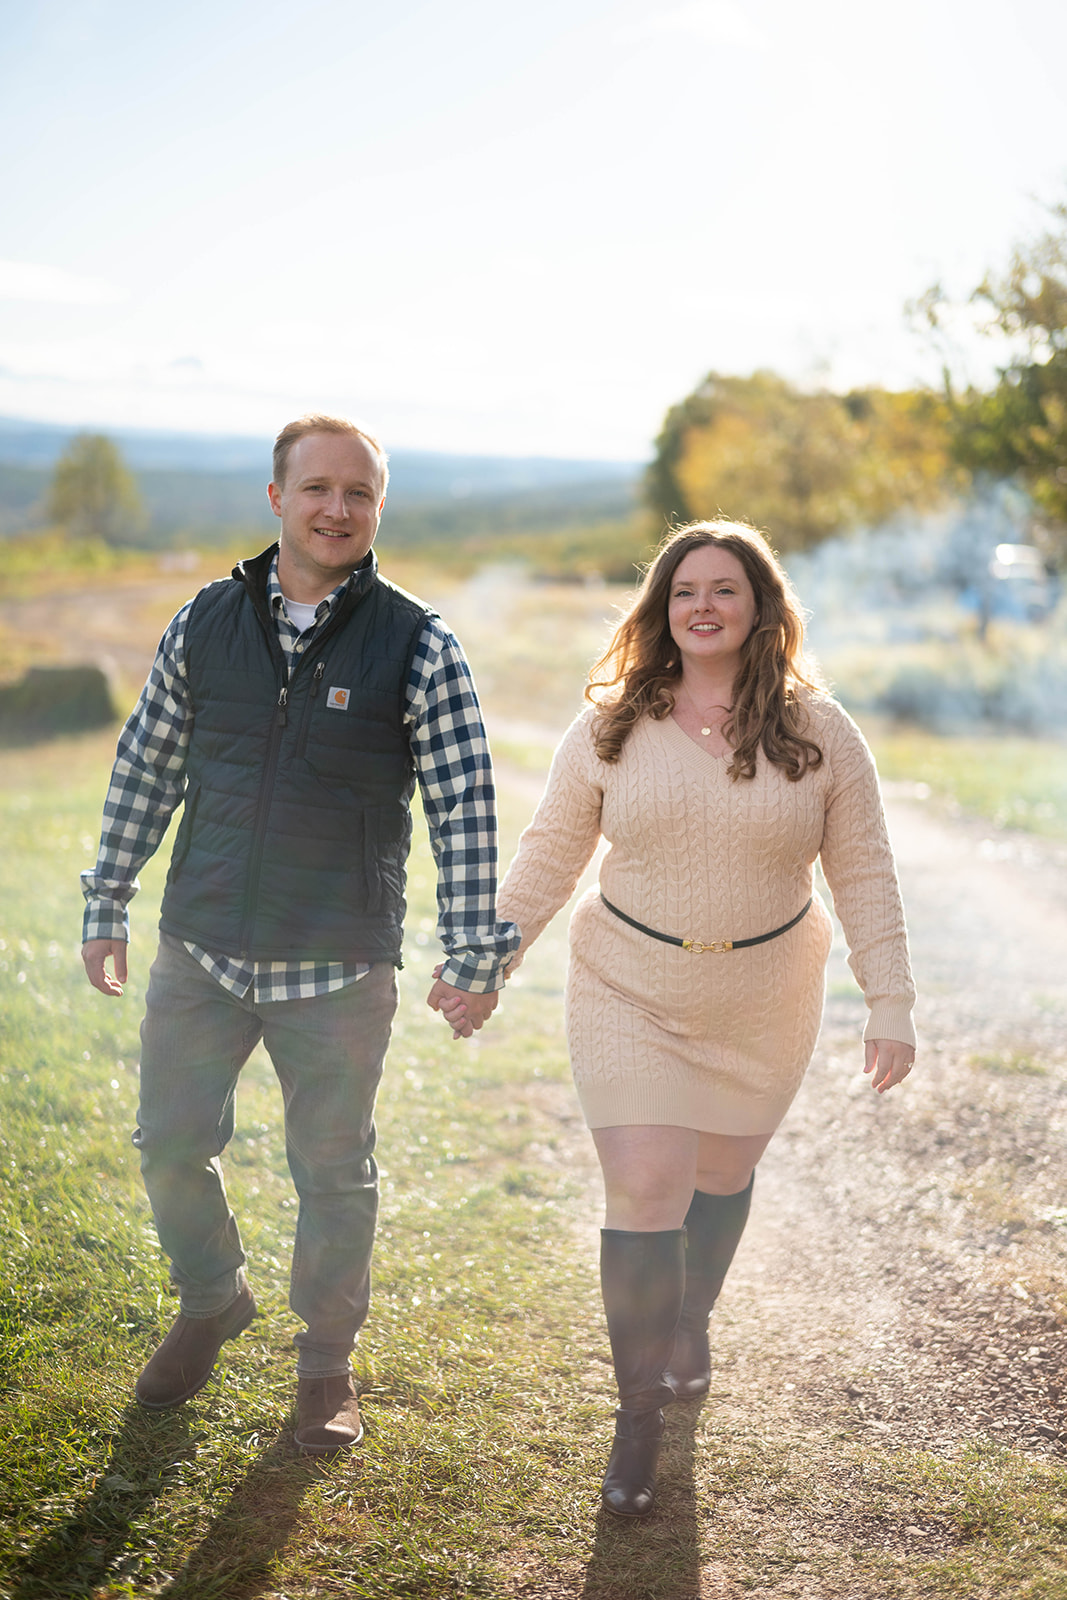 dreamy light during this engagement session in the pocono mountains